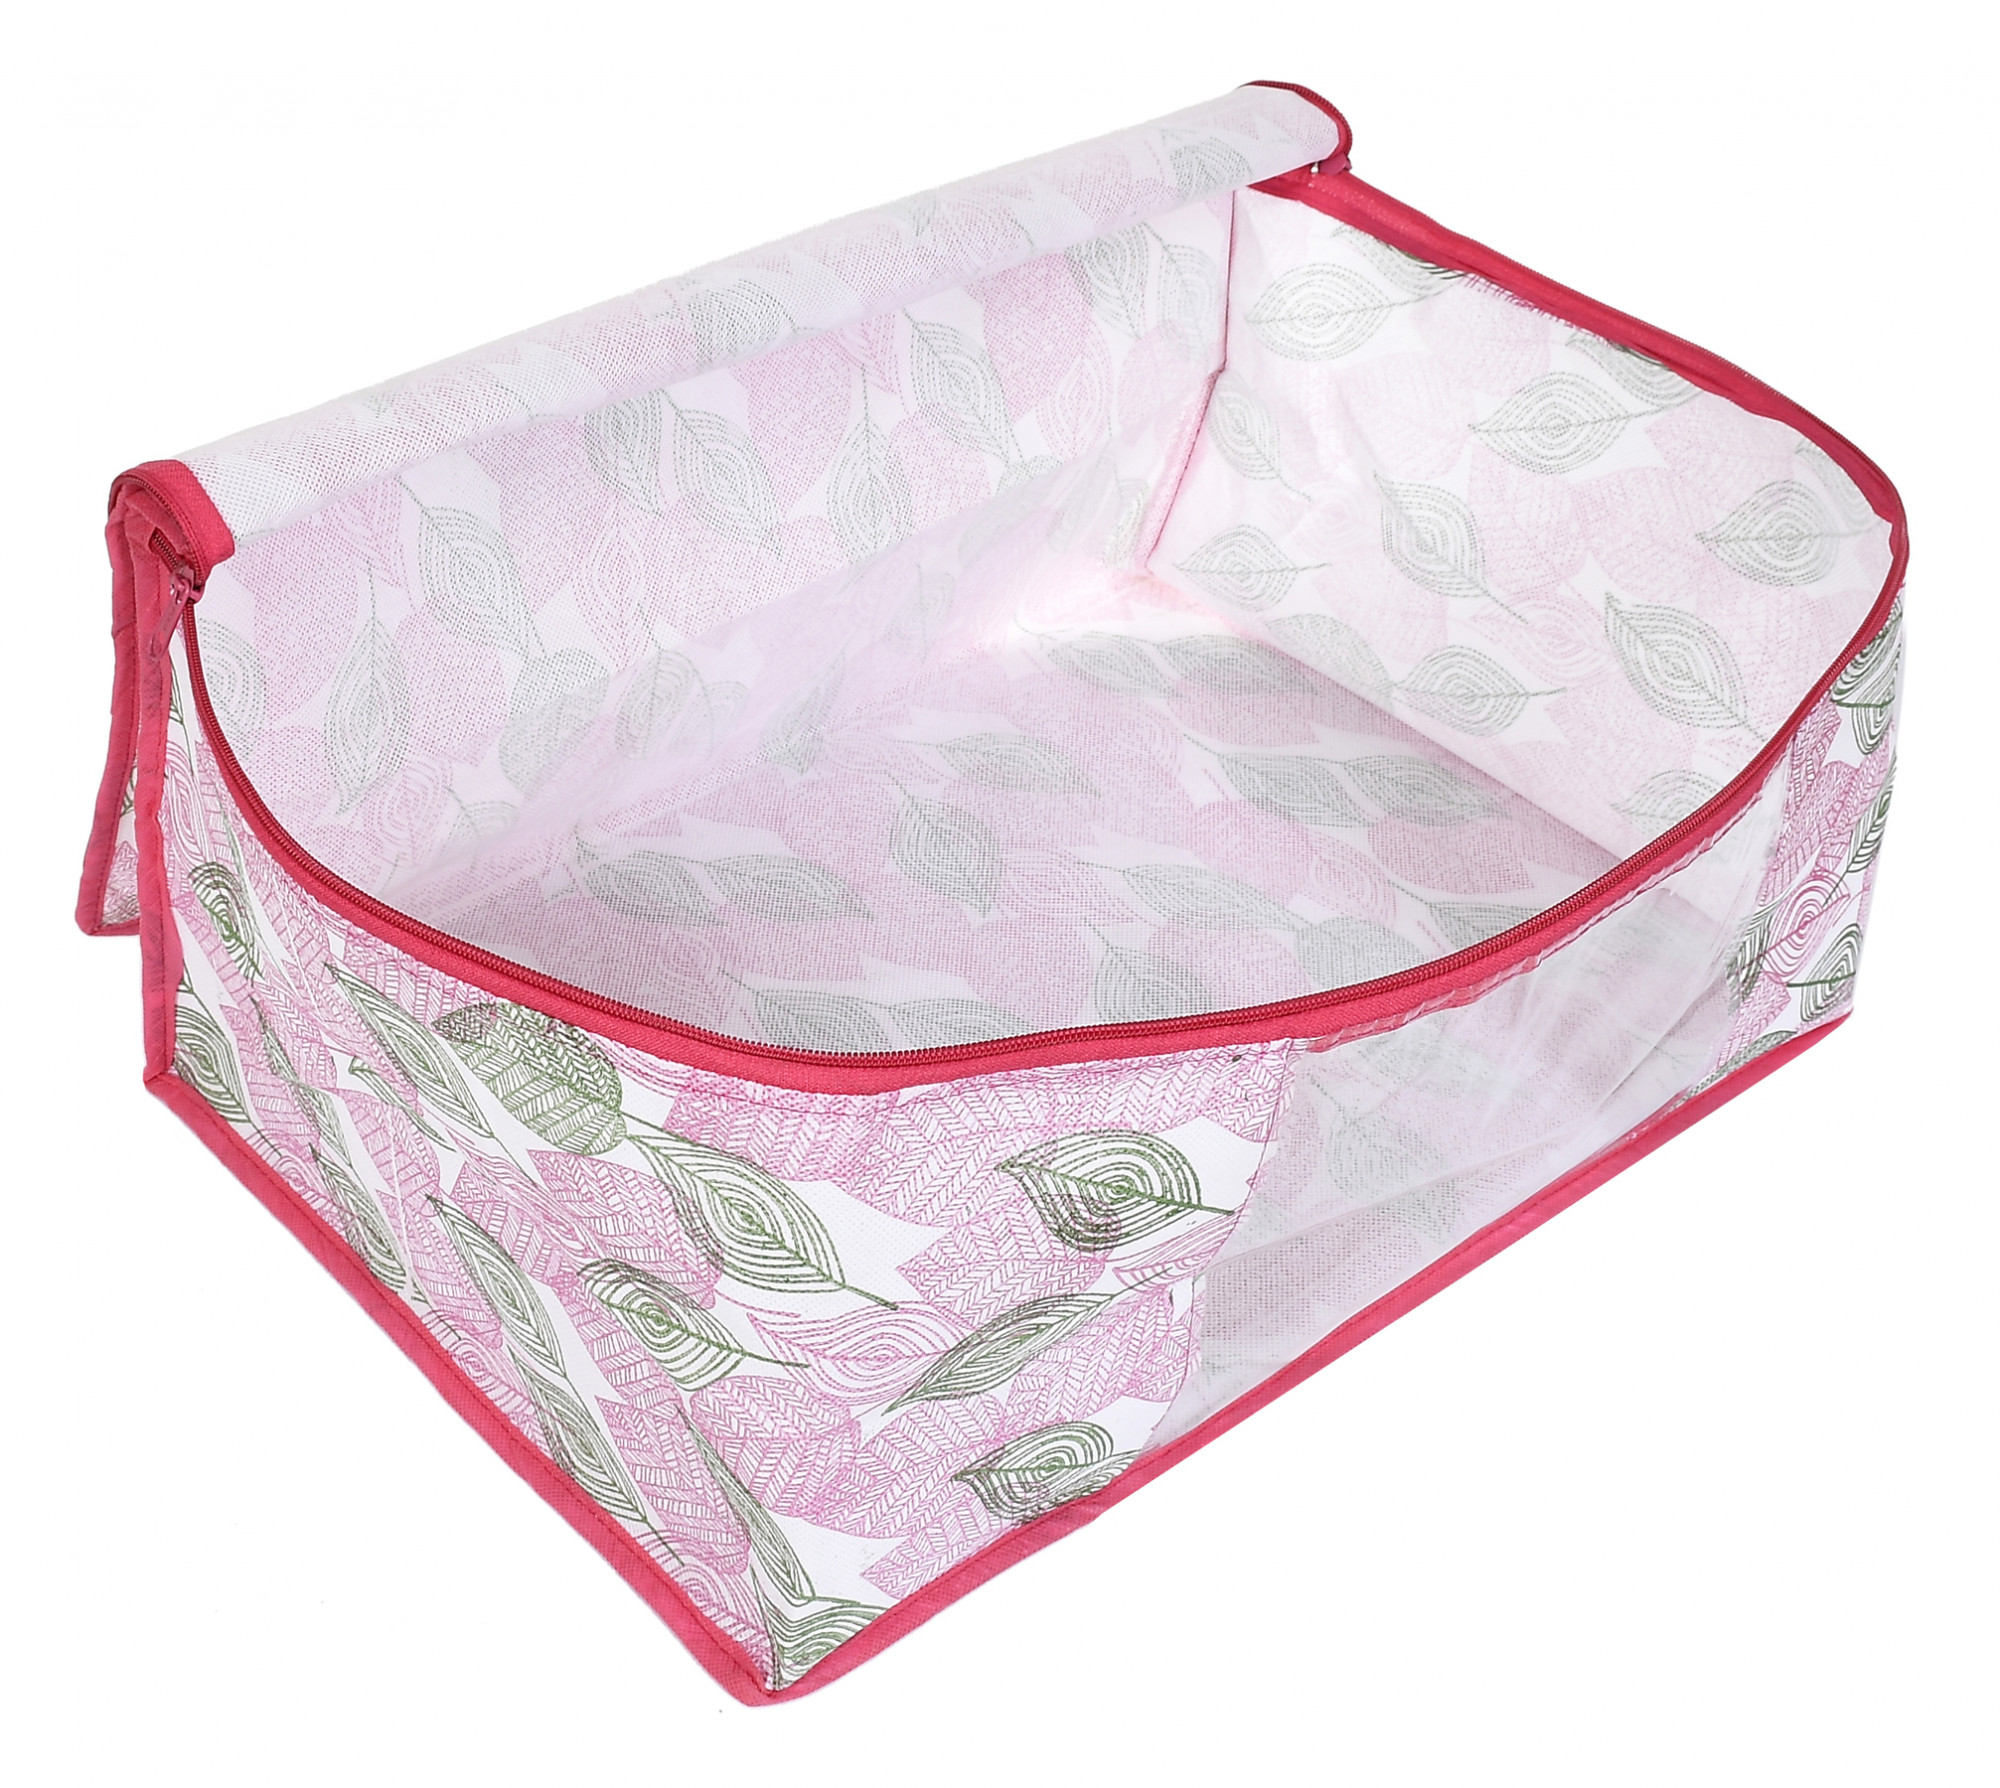 Kuber Industries Metalic leafy Print Non Woven Fabric Saree Cover/Clothes Organiser For Wardrobe Set with Transparent Window, Extra Large (Pink)-34_S_KUBMART16529